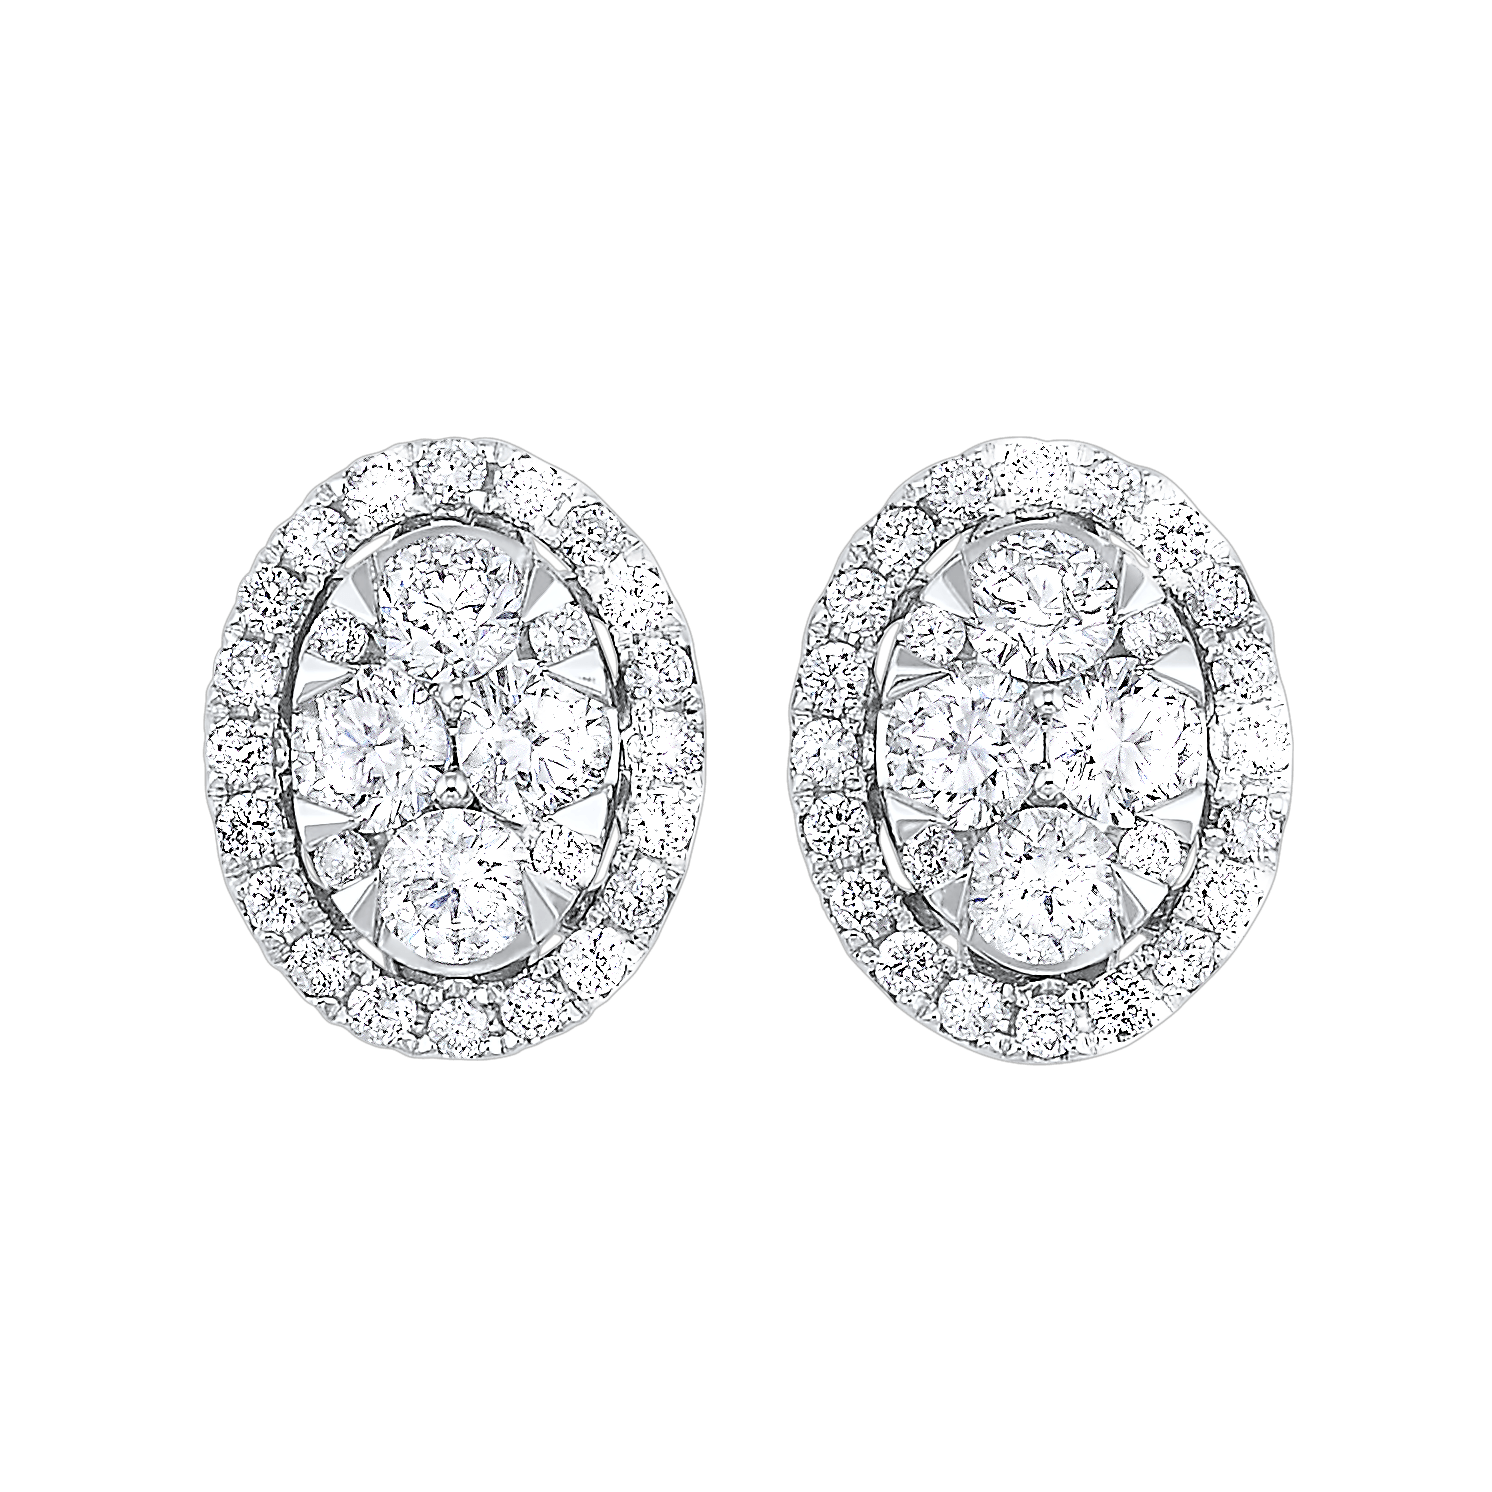 BW James Jewelers Earrings 16 Page Christmas Catalog Offer 14KTW Uno Halo Round Earrings 3/4 Ctw